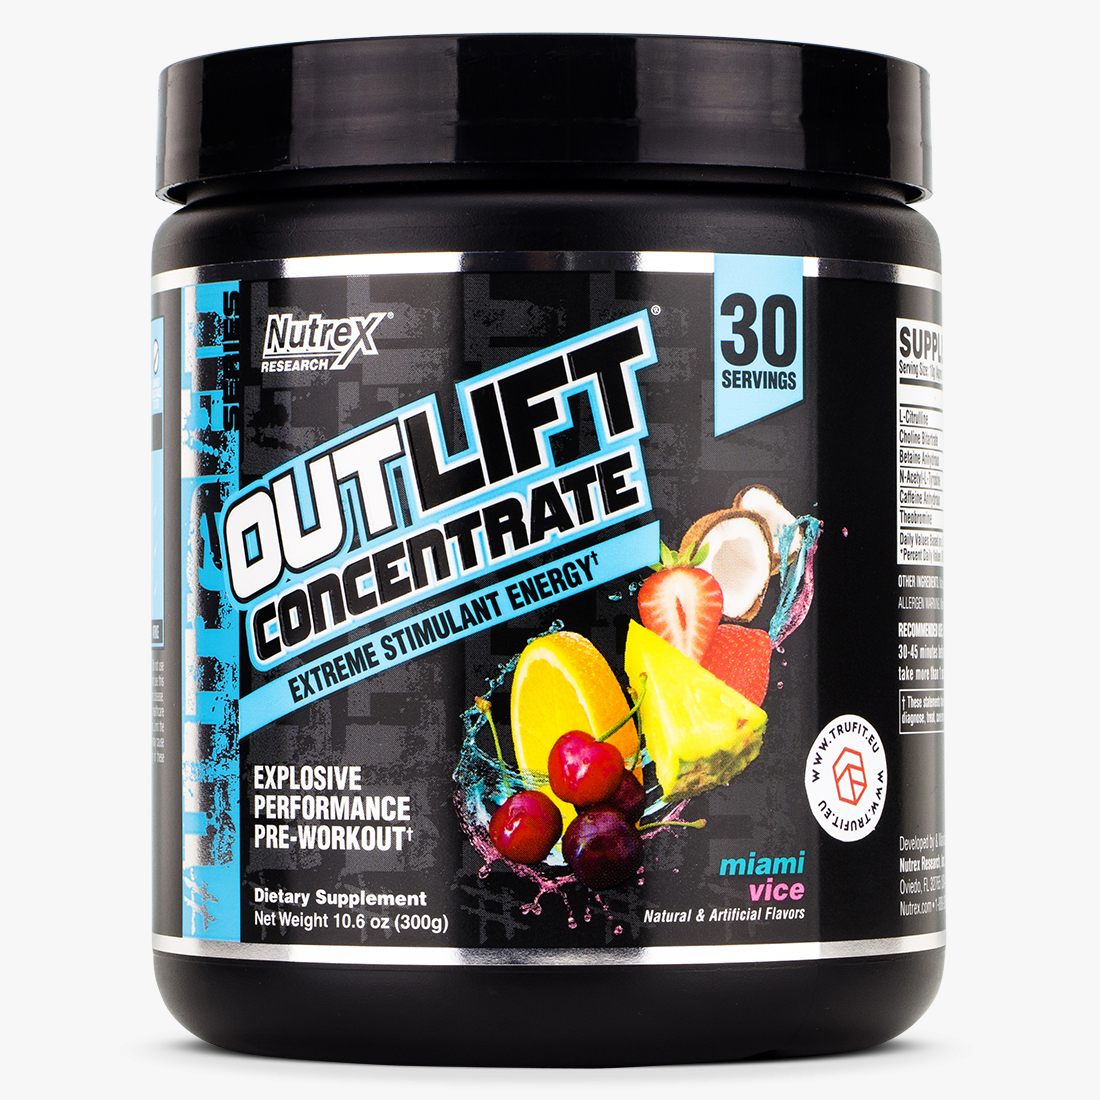 Best Outlift concentrate pre workout for Push Pull Legs